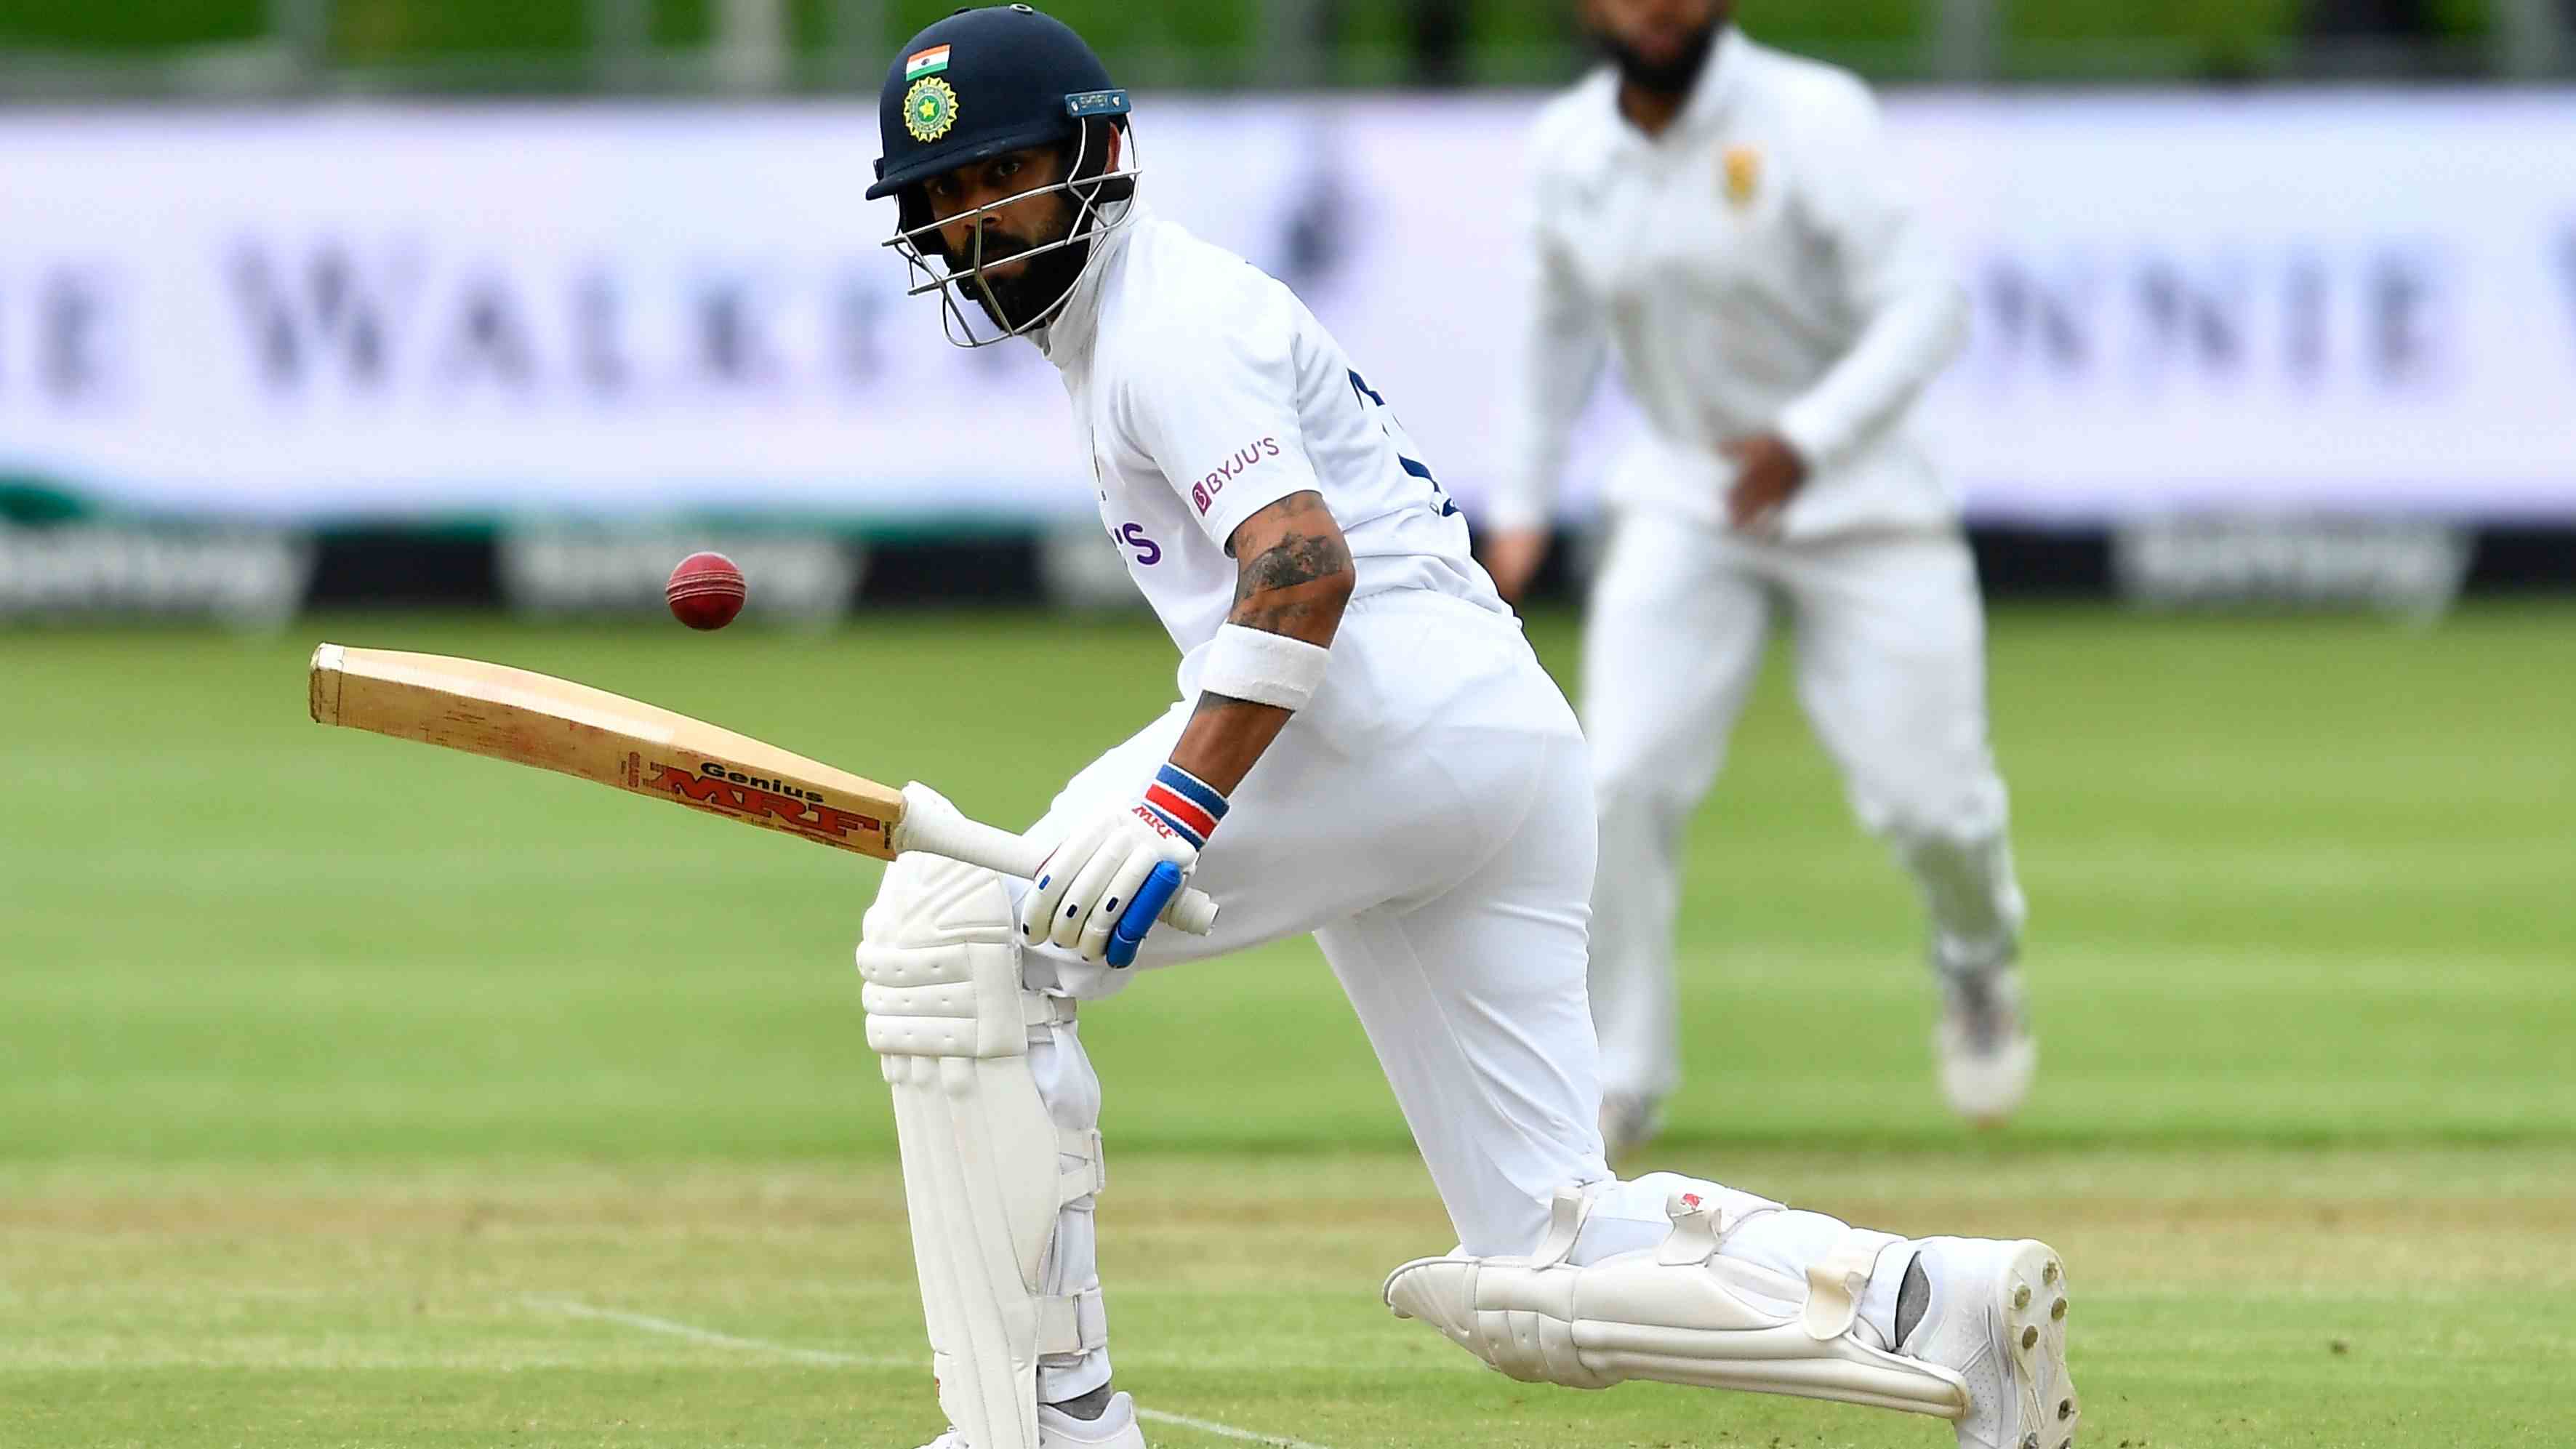 SA vs IND: Lone warrior Kohli notches up half-century but visitors bundled out for 223 in first innings  